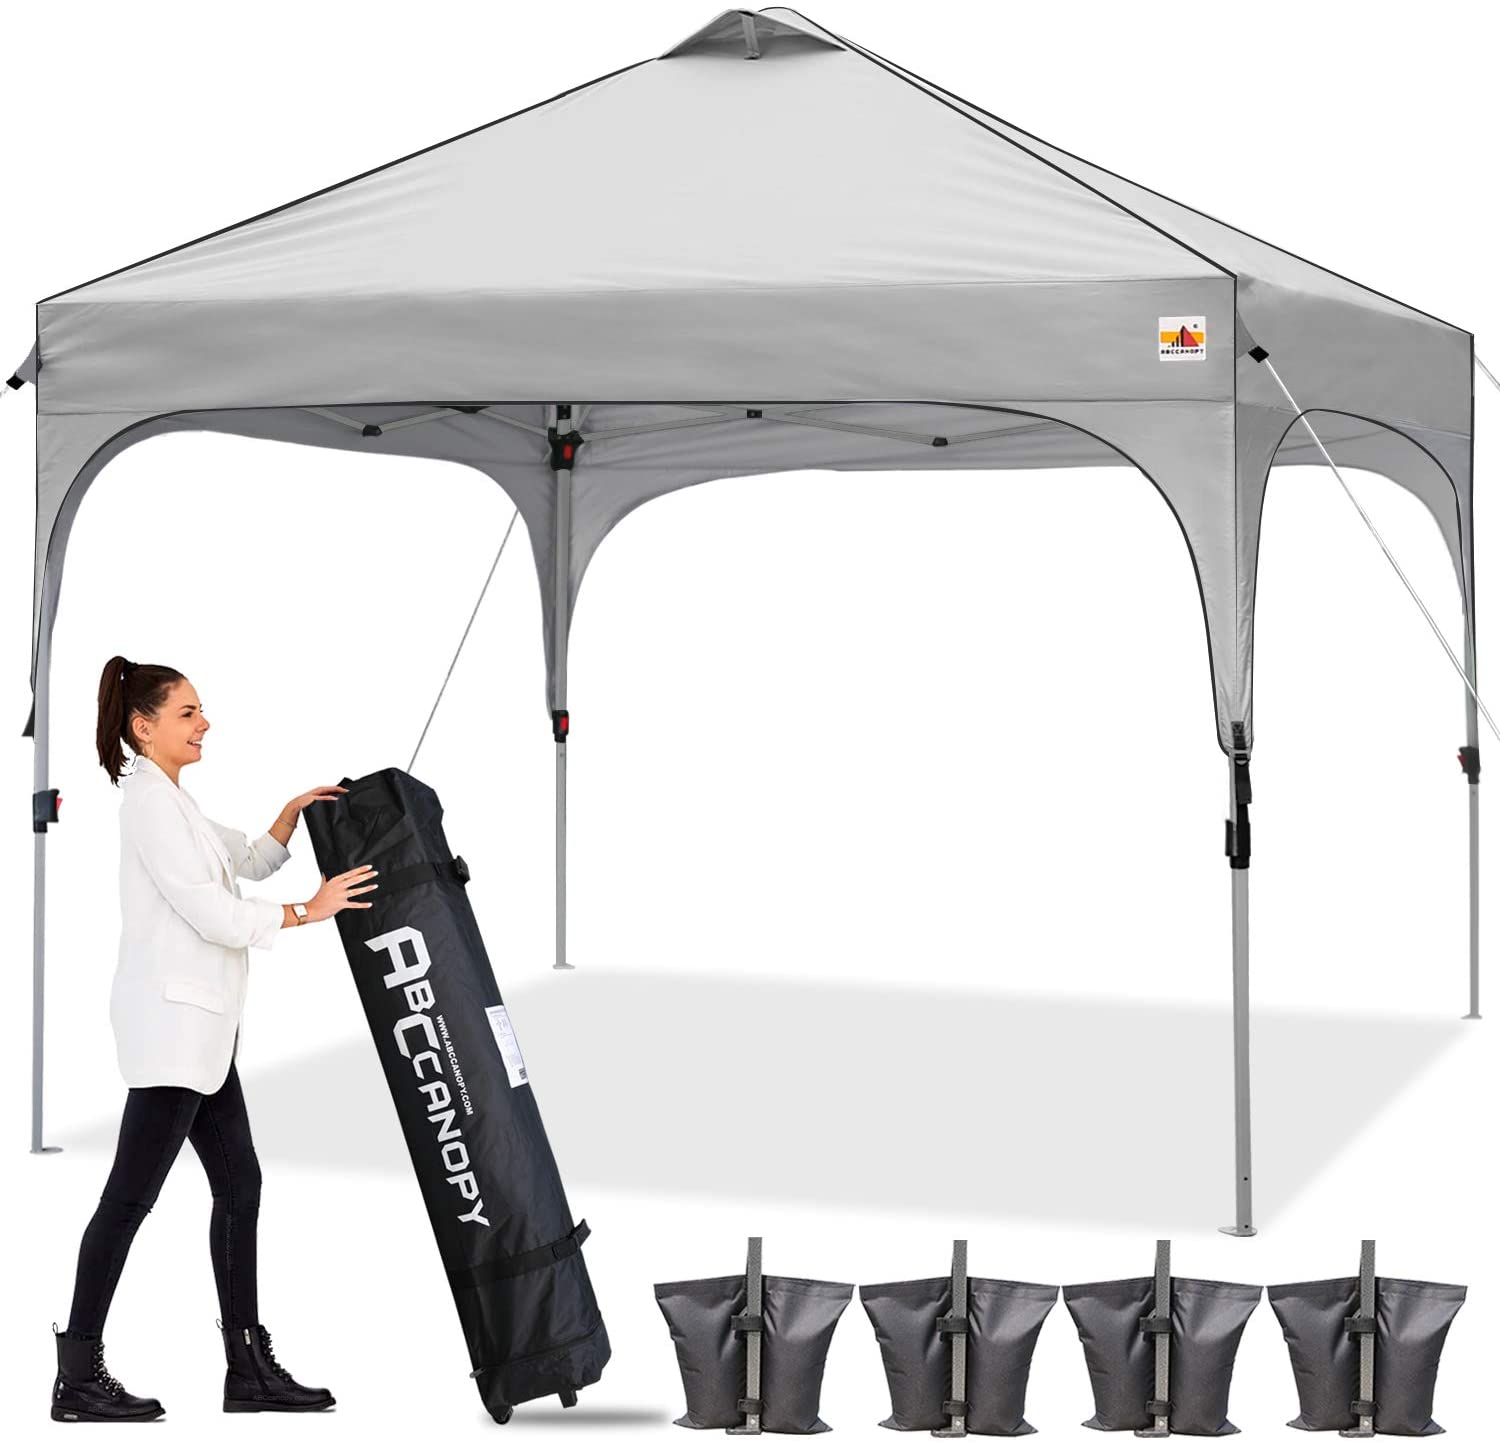 ABCCANOPY Canopy Tent 10x10 Pop Up Canopy Outdoor Canopies Super Comapct Canopy Portable Tent Popup Beach Canopy Shade Canopy Tent with Wheeled Carry Bag Bonus 4xWeight Bags,4xRopes&4xStakes, Gray